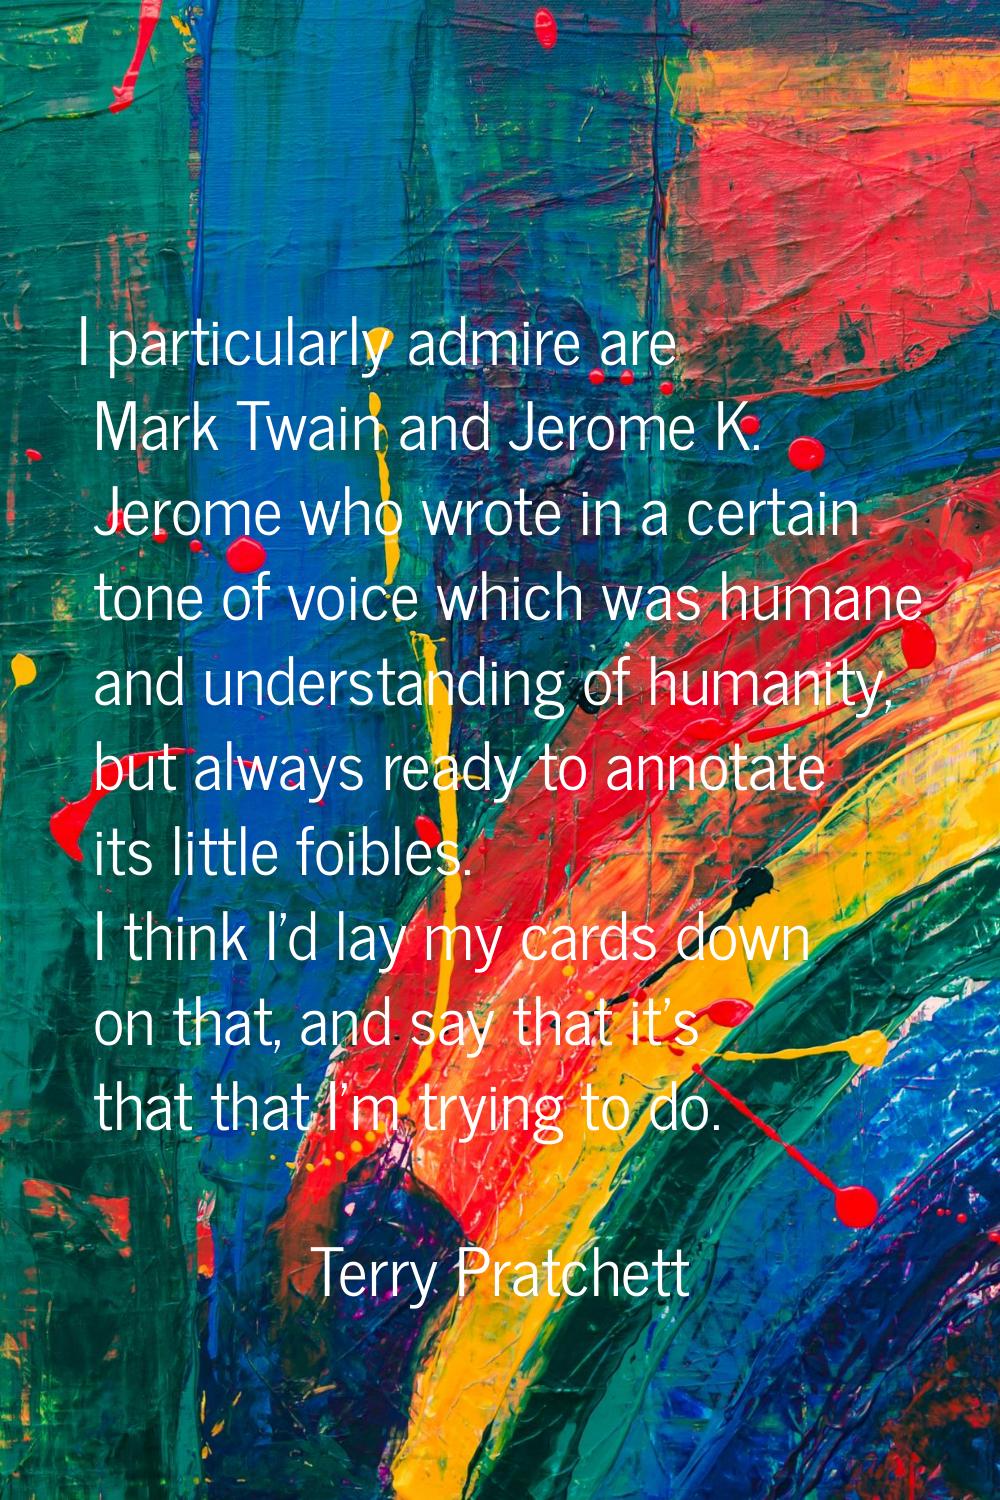 I particularly admire are Mark Twain and Jerome K. Jerome who wrote in a certain tone of voice whic